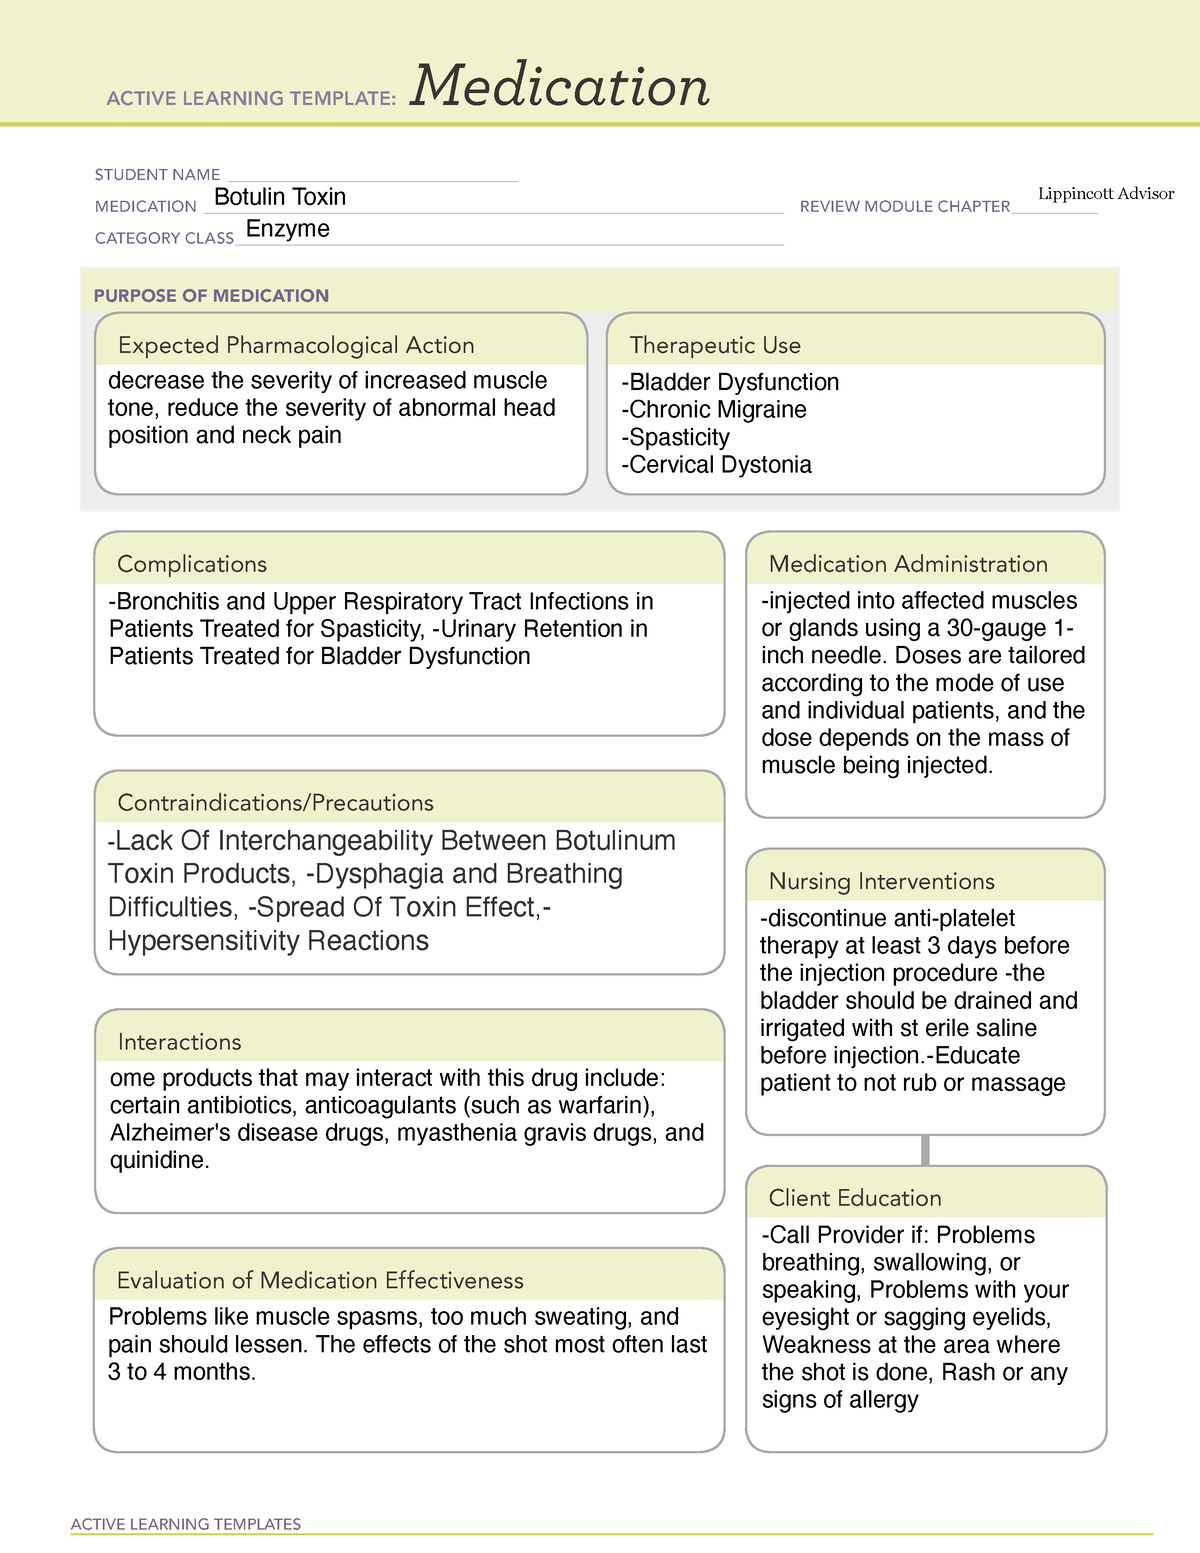 regular-and-nph-insulin-medication-ati-template-docx-active-learning-template-medication